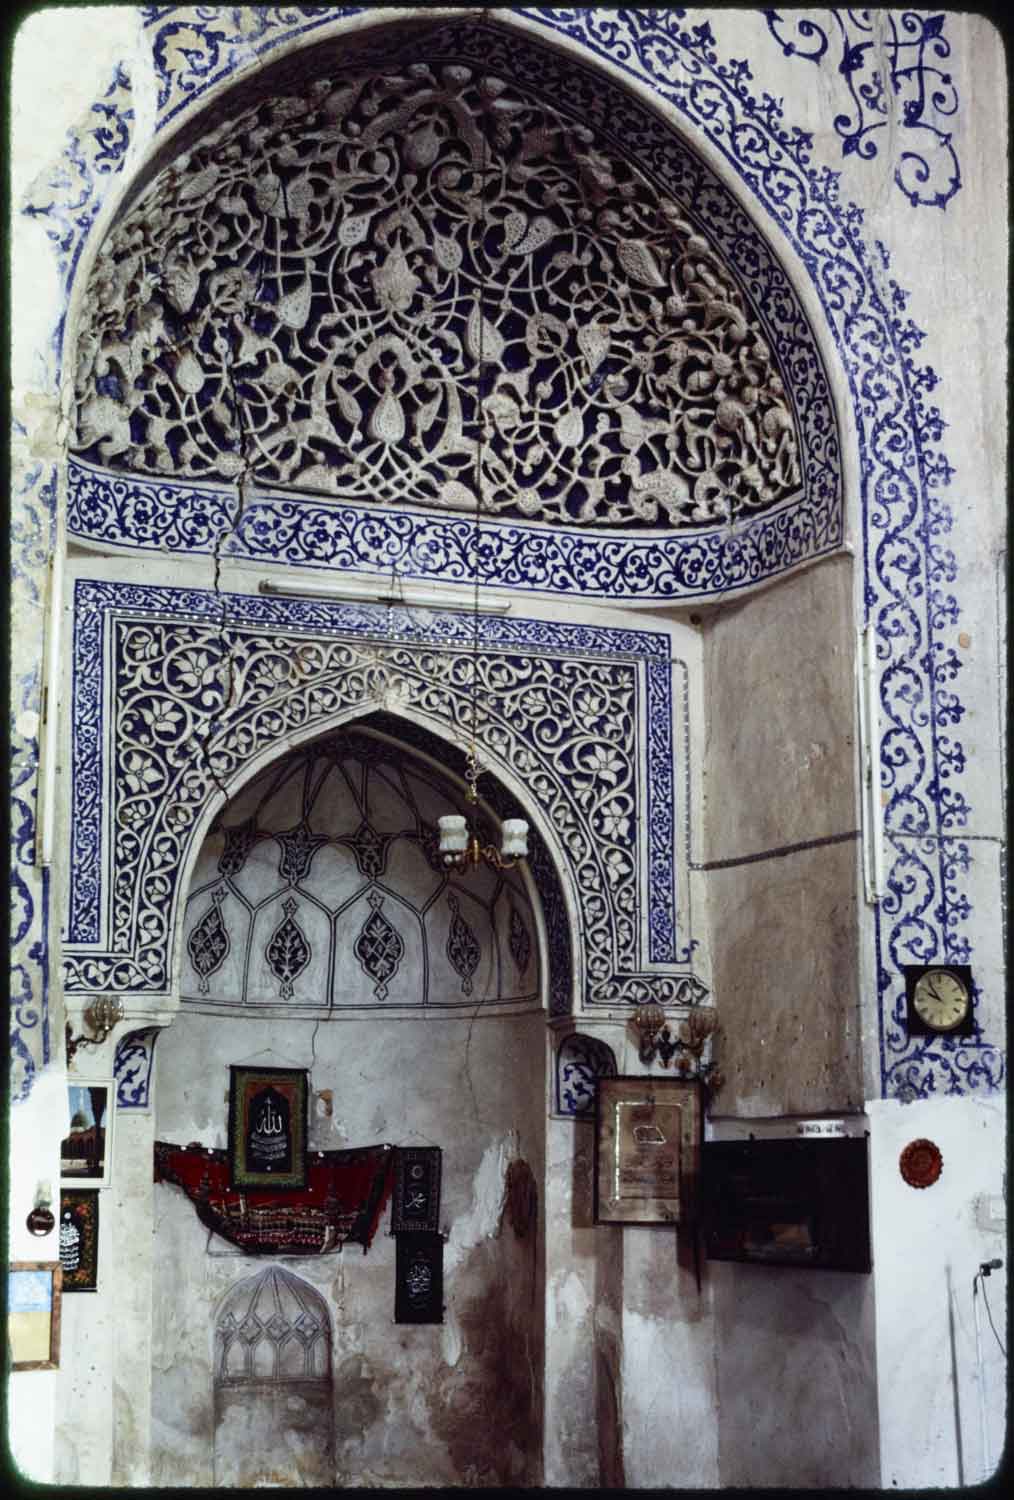 Detail of the mihrab.